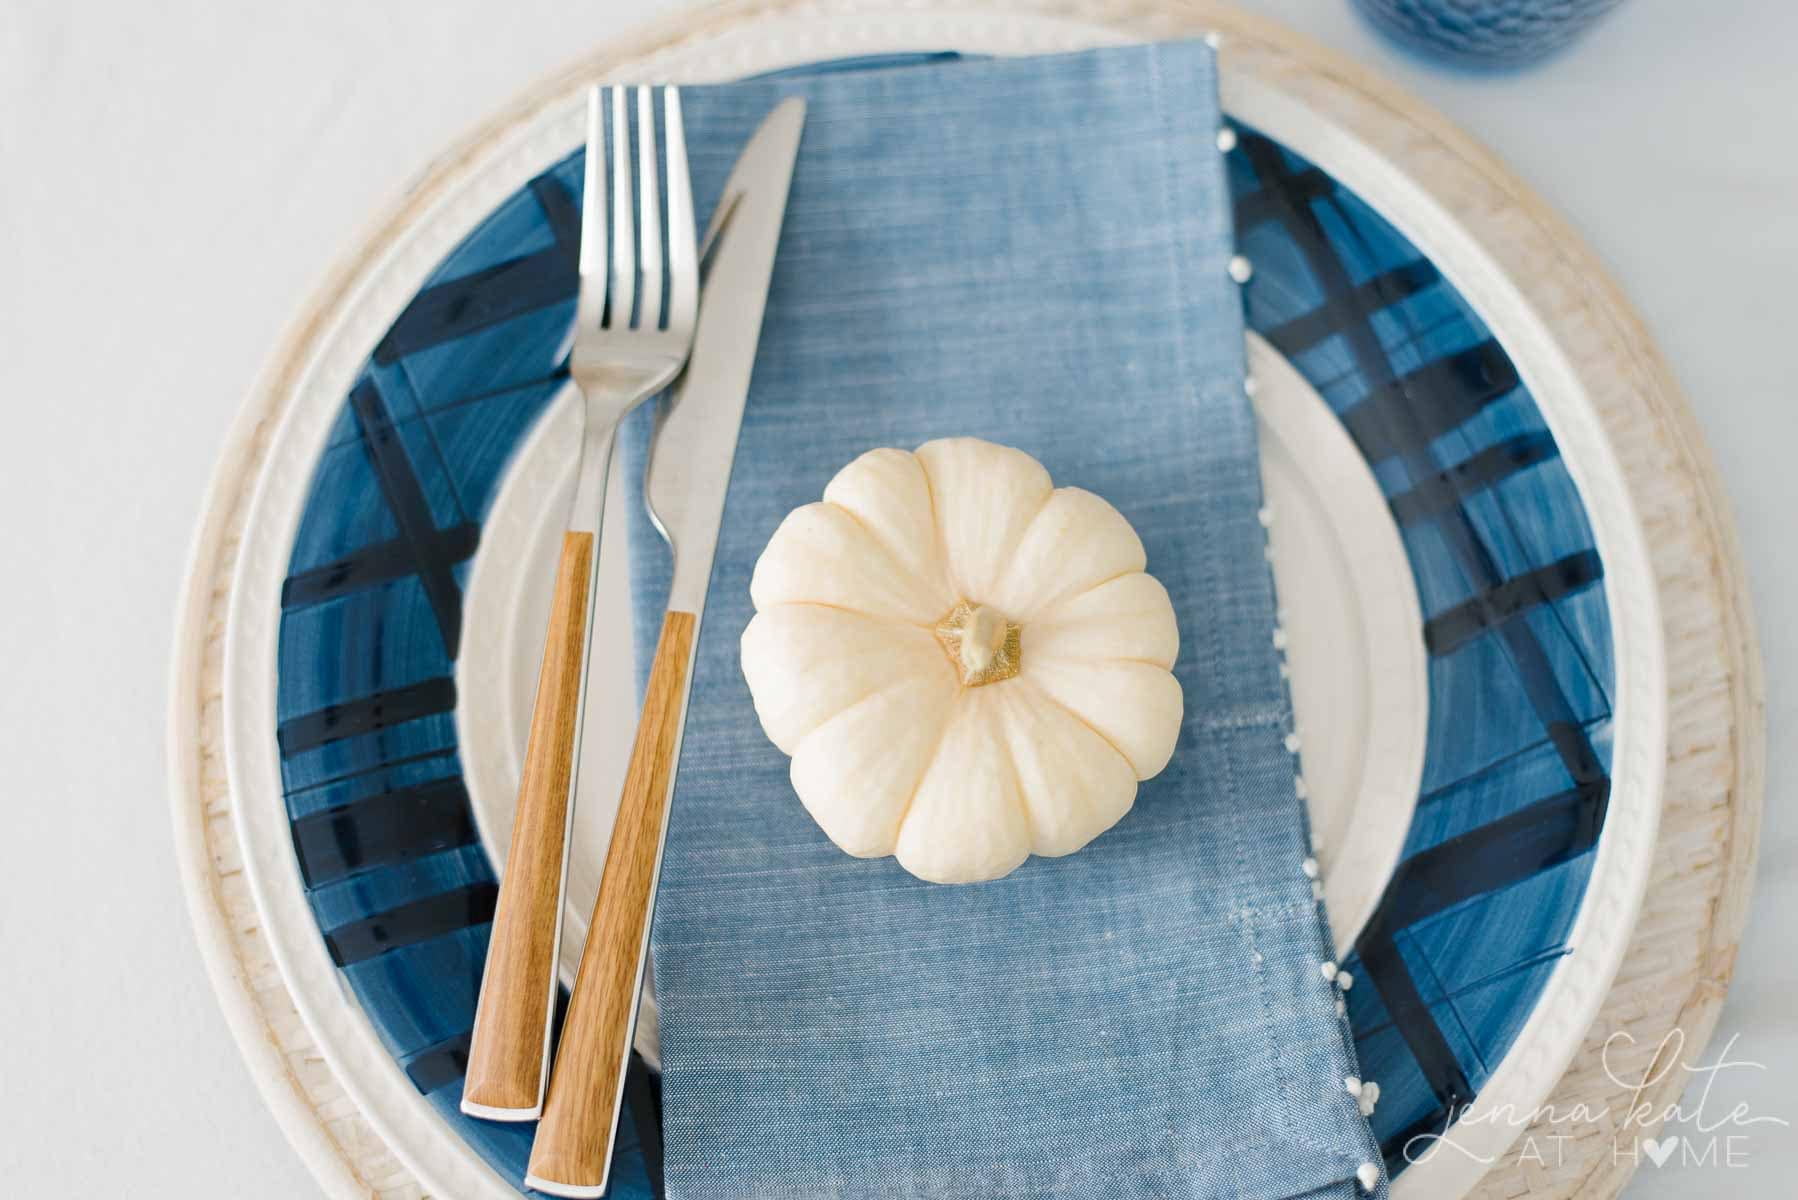 mini white pumpkin on a plate as part of a table setting inspired by nature